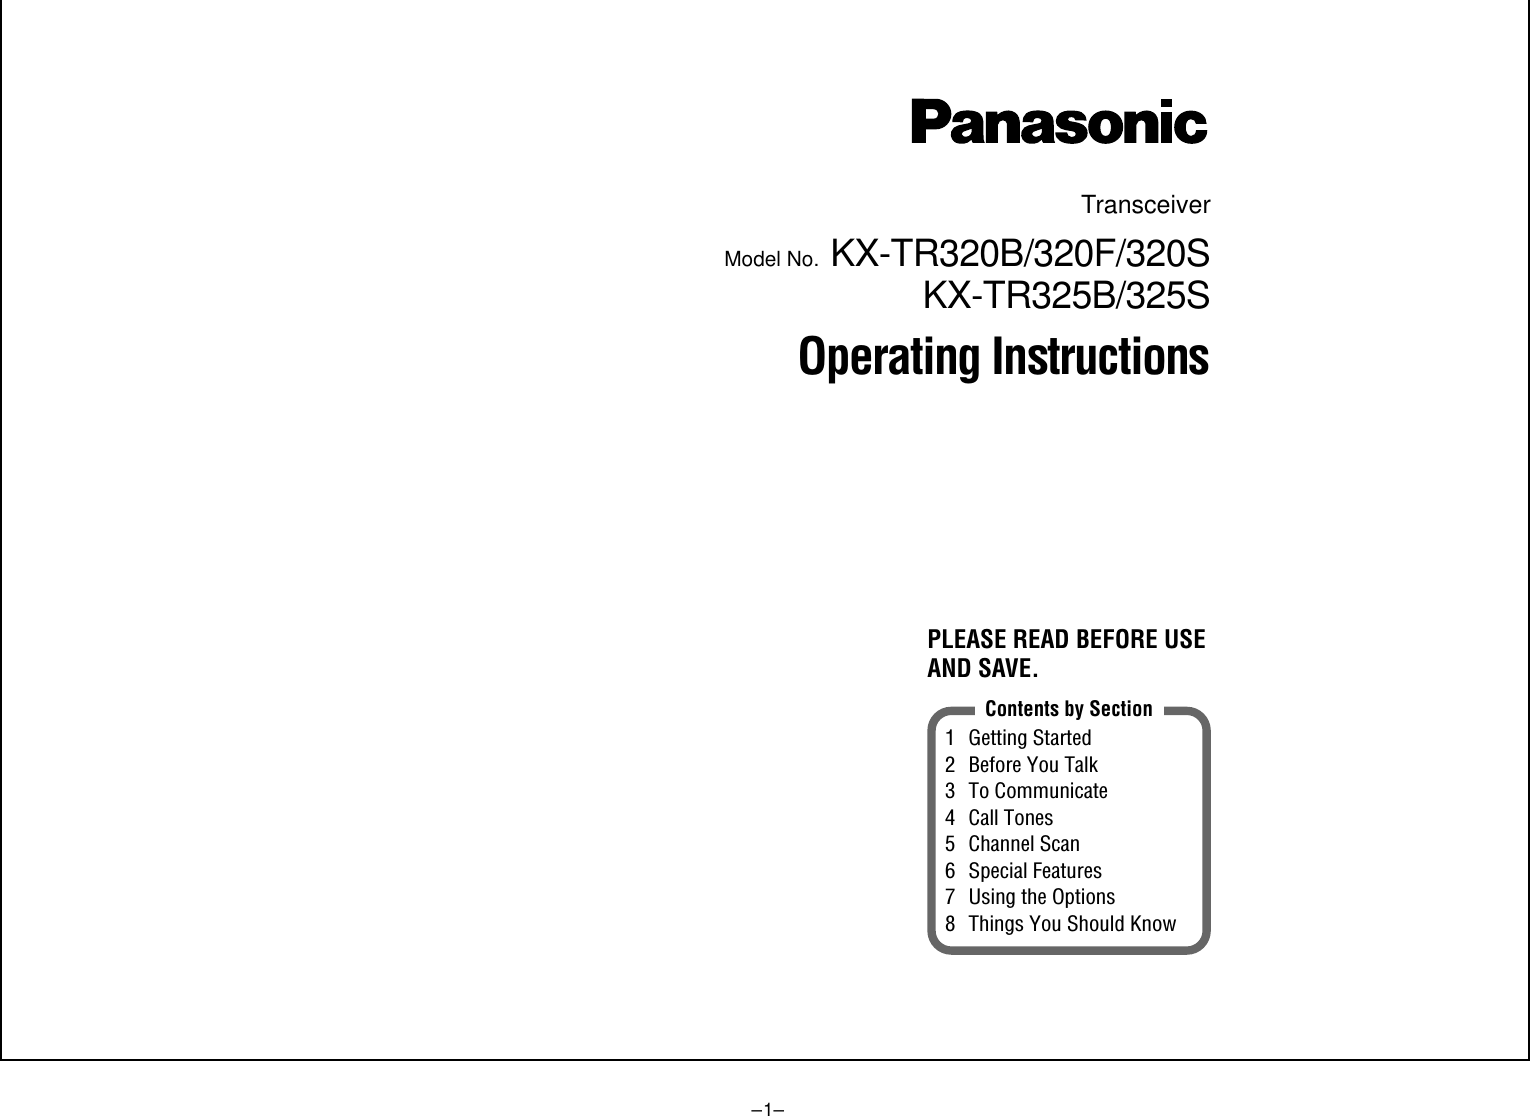 –1–TransceiverModel No. KX-TR320B/320F/320SKX-TR325B/325SOperating InstructionsPLEASE READ BEFORE USEAND SAVE.1 Getting Started2 Before You Talk3 To Communicate4 Call Tones5 Channel Scan6 Special Features7 Using the Options8 Things You Should KnowContents by Section